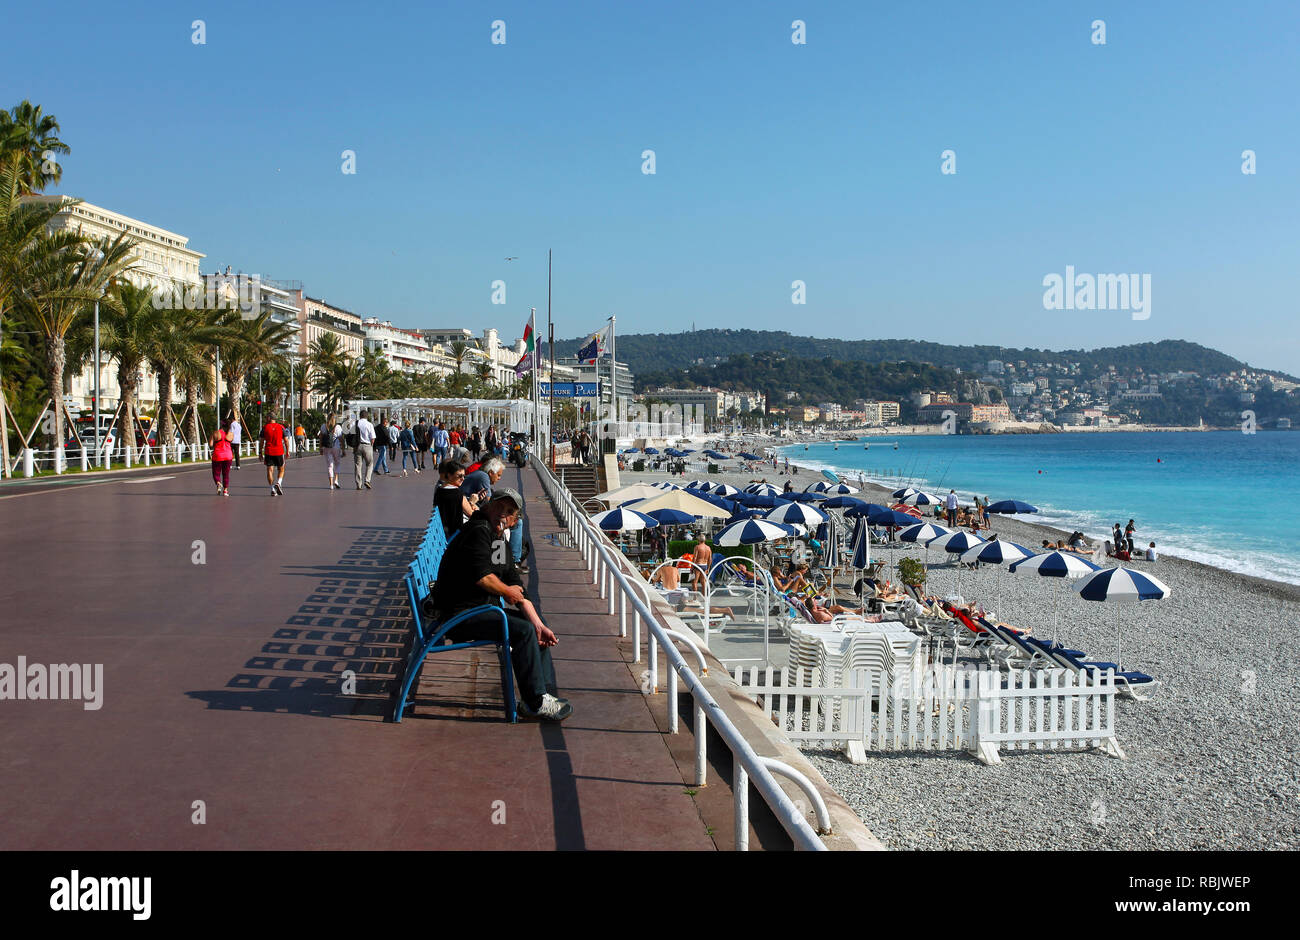 Image of the Beach and Promenade Des Angles which runs along the Mediterranean Sea on the Cote d’Azur (The French Riviera) in Nice, France Stock Photo